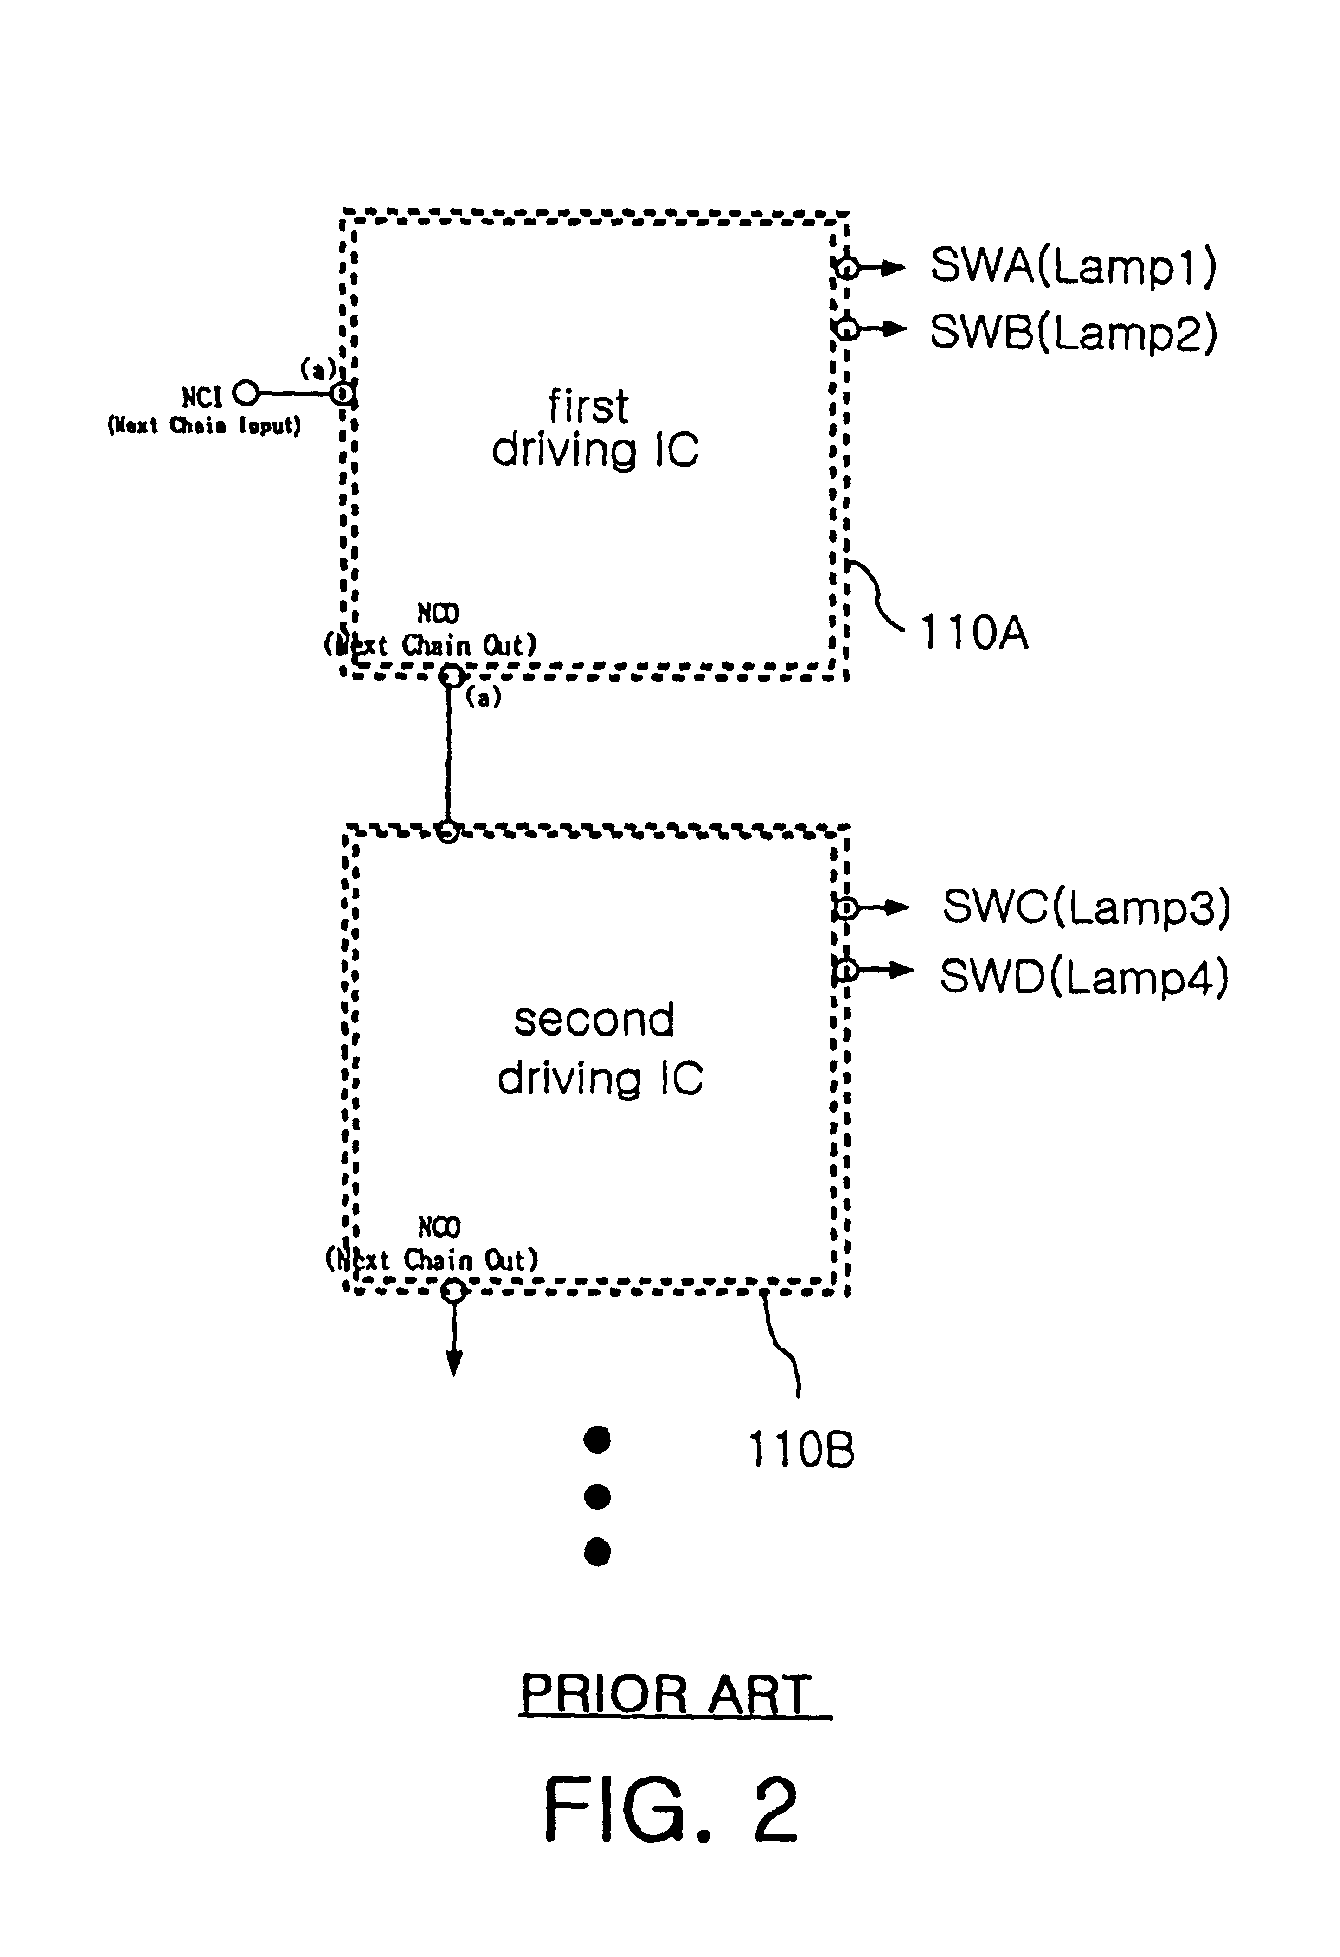 Backlight inverter for liquid crystal display panel of asynchronous pulse width modulation driving type